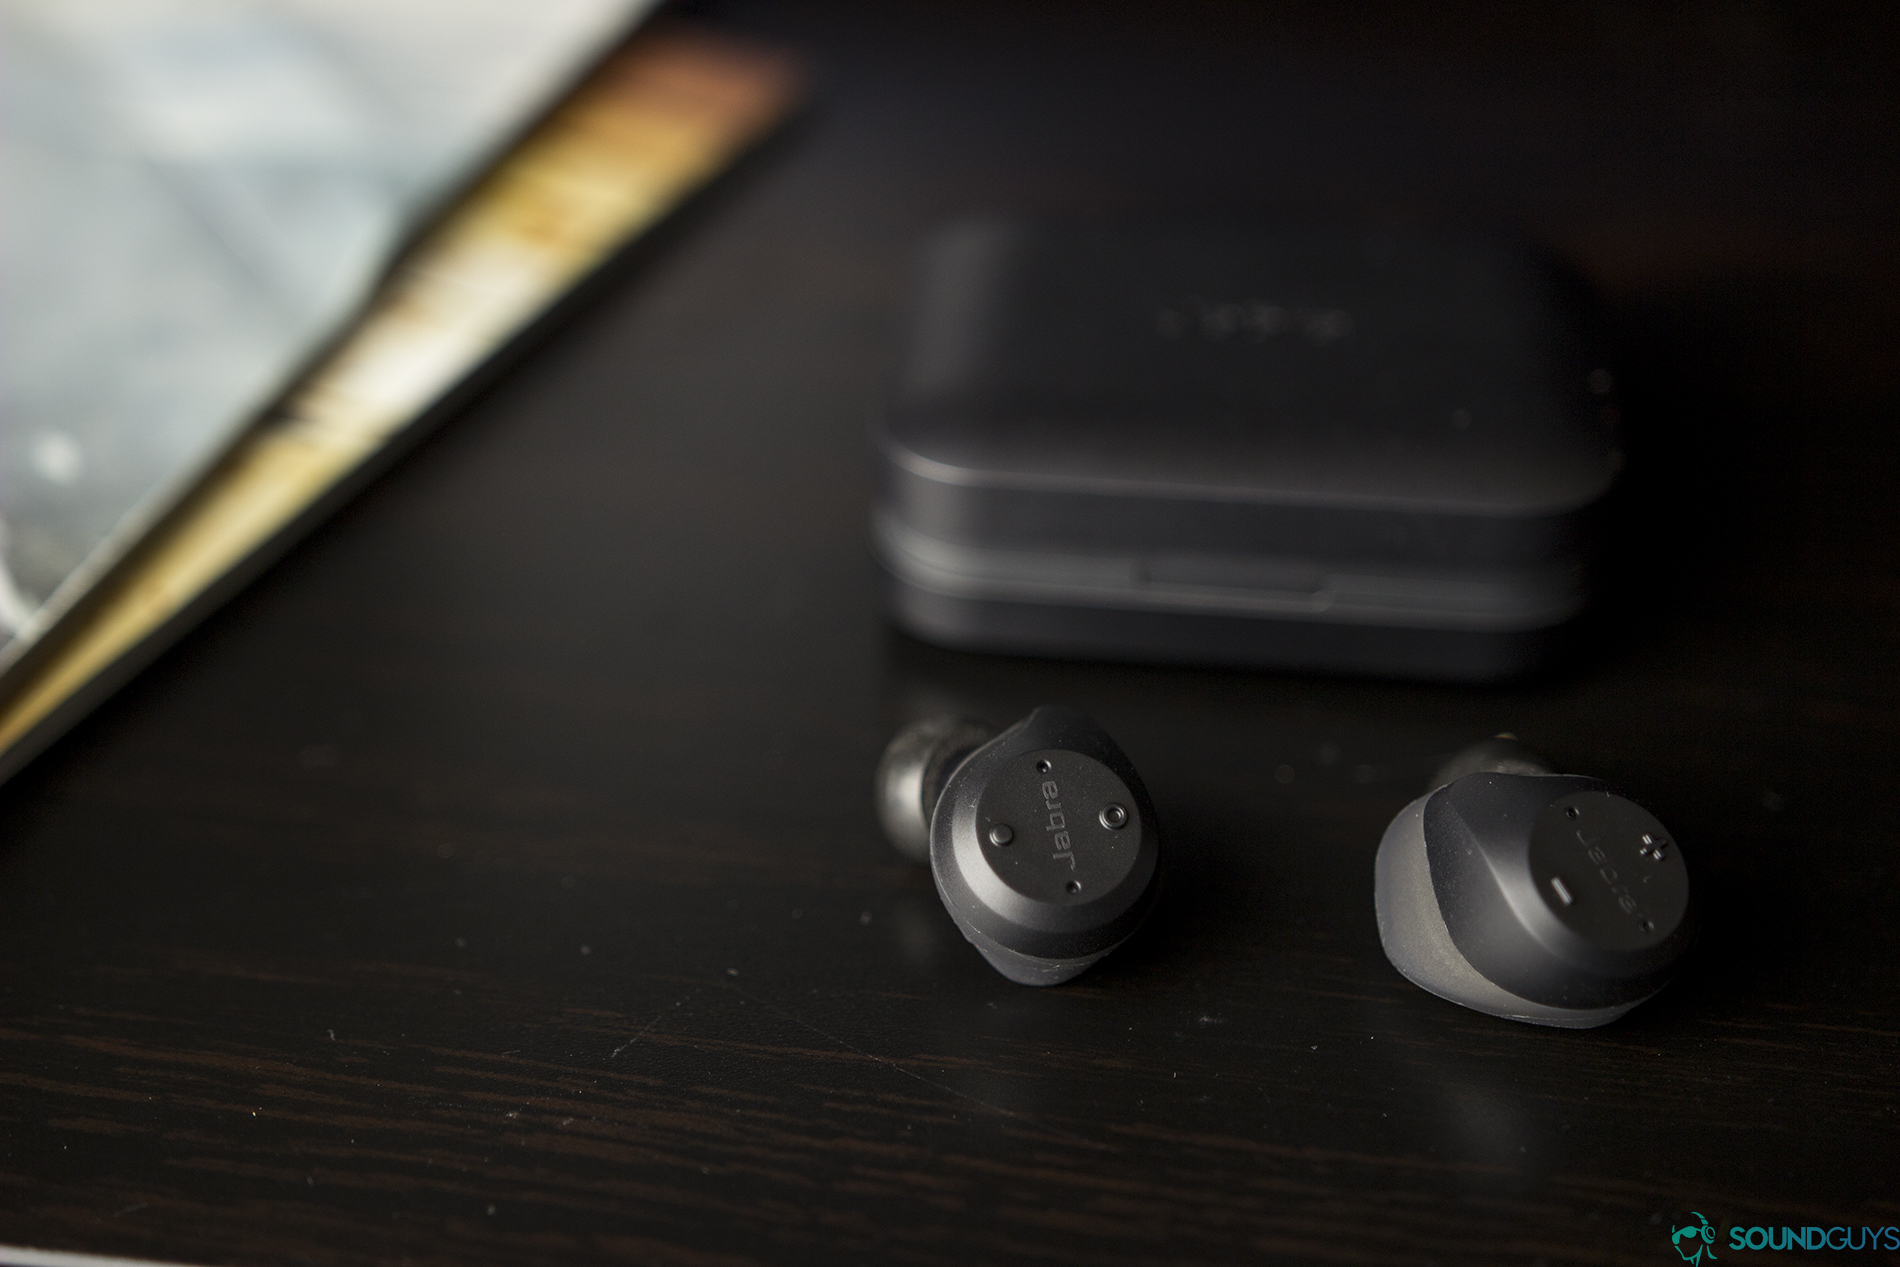 The Jabra Elite 65t in front of its charging case.